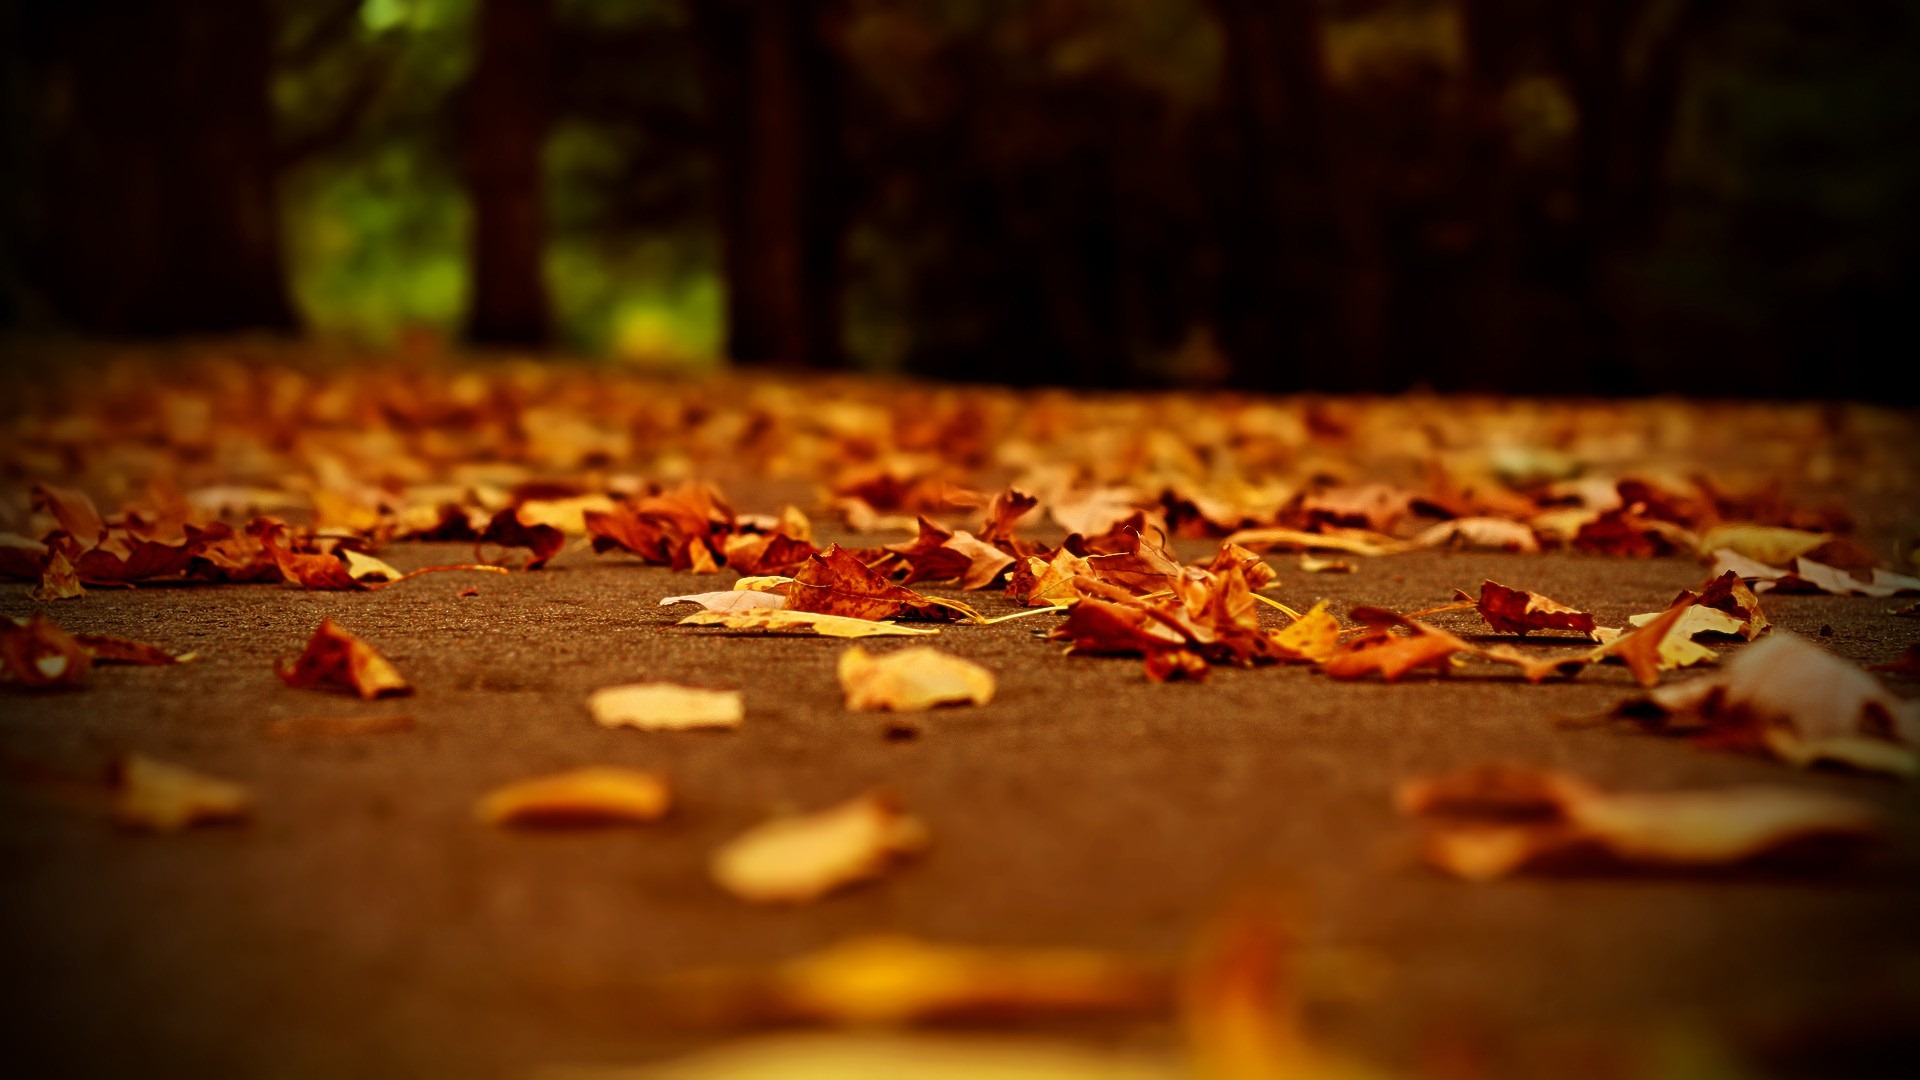 Leaves Yellow Autumn Wallpapers | Wallpapers, Backgrounds, Images ...